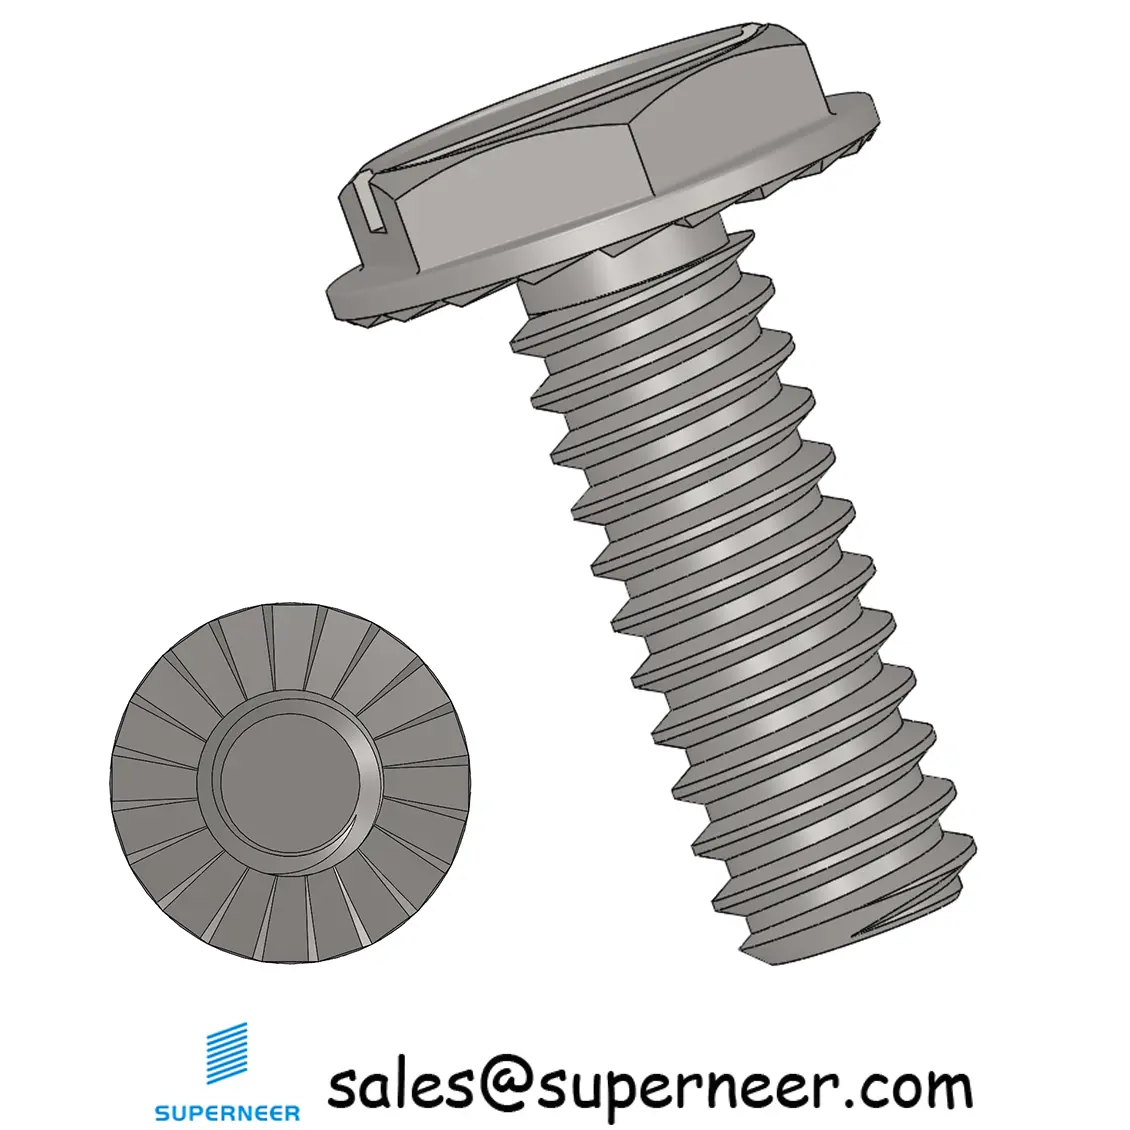 4-40 x 5/16" Indented Hex Washer Serrated Head Slotted Machine Screw SUS304 Stainless Steel Inox